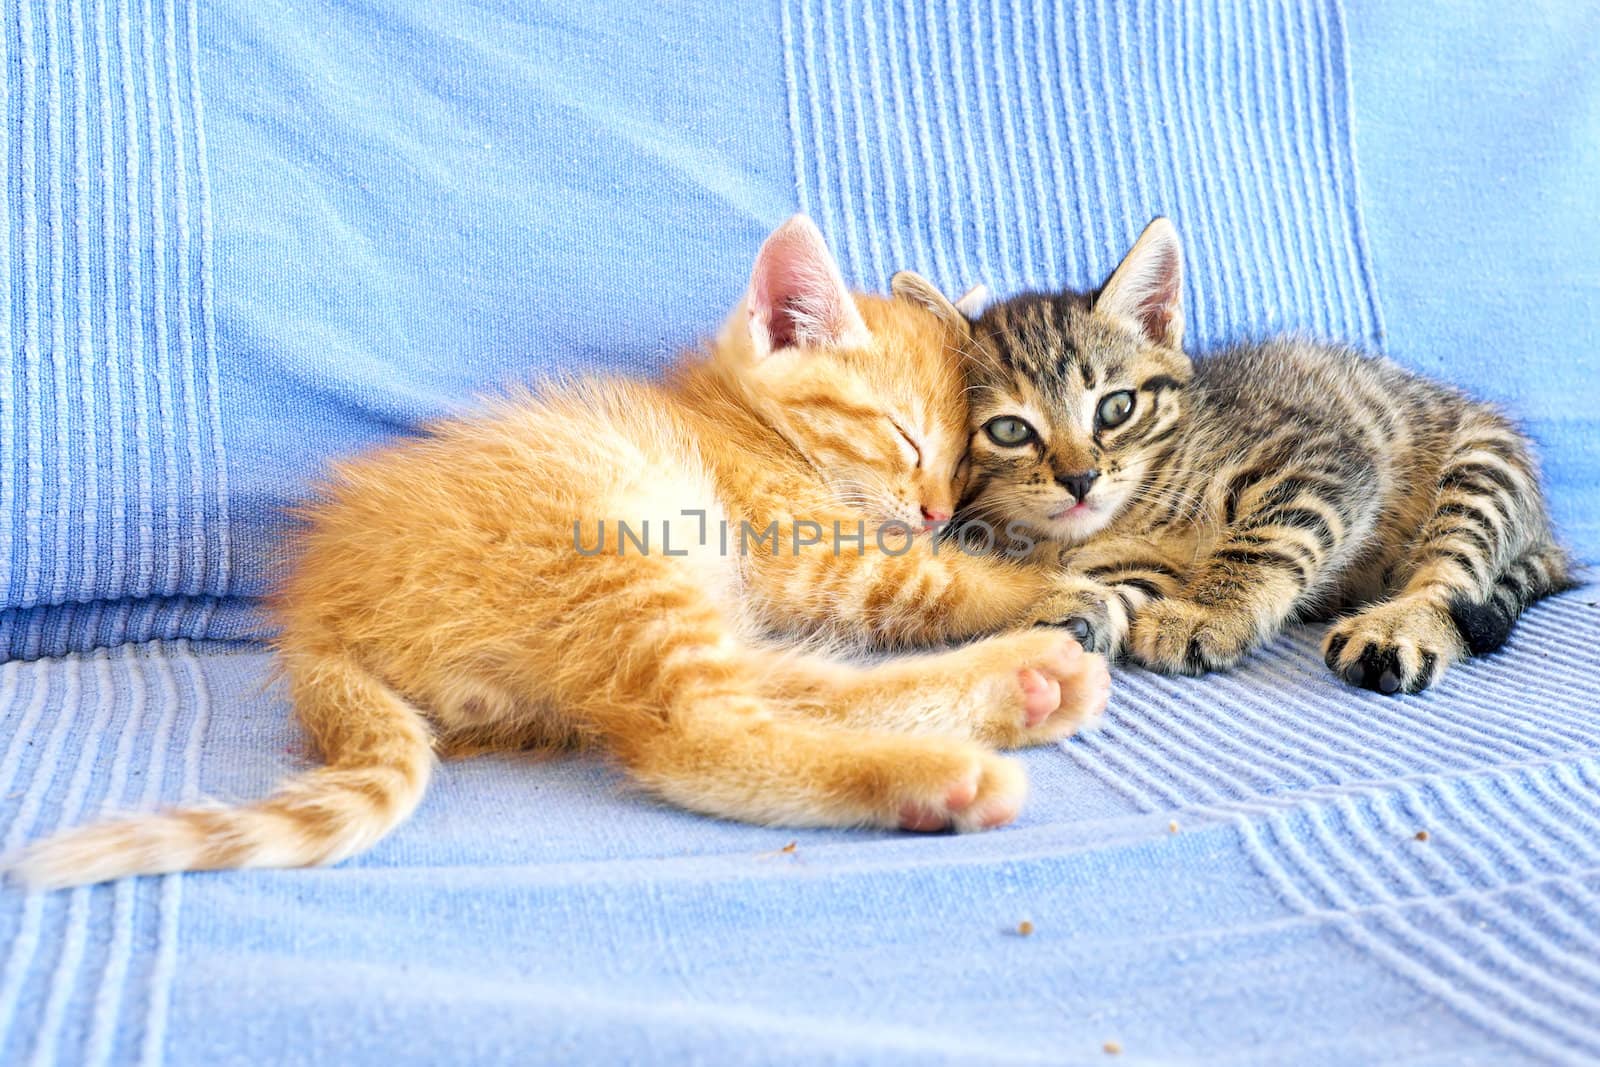 Little kittens on a couch